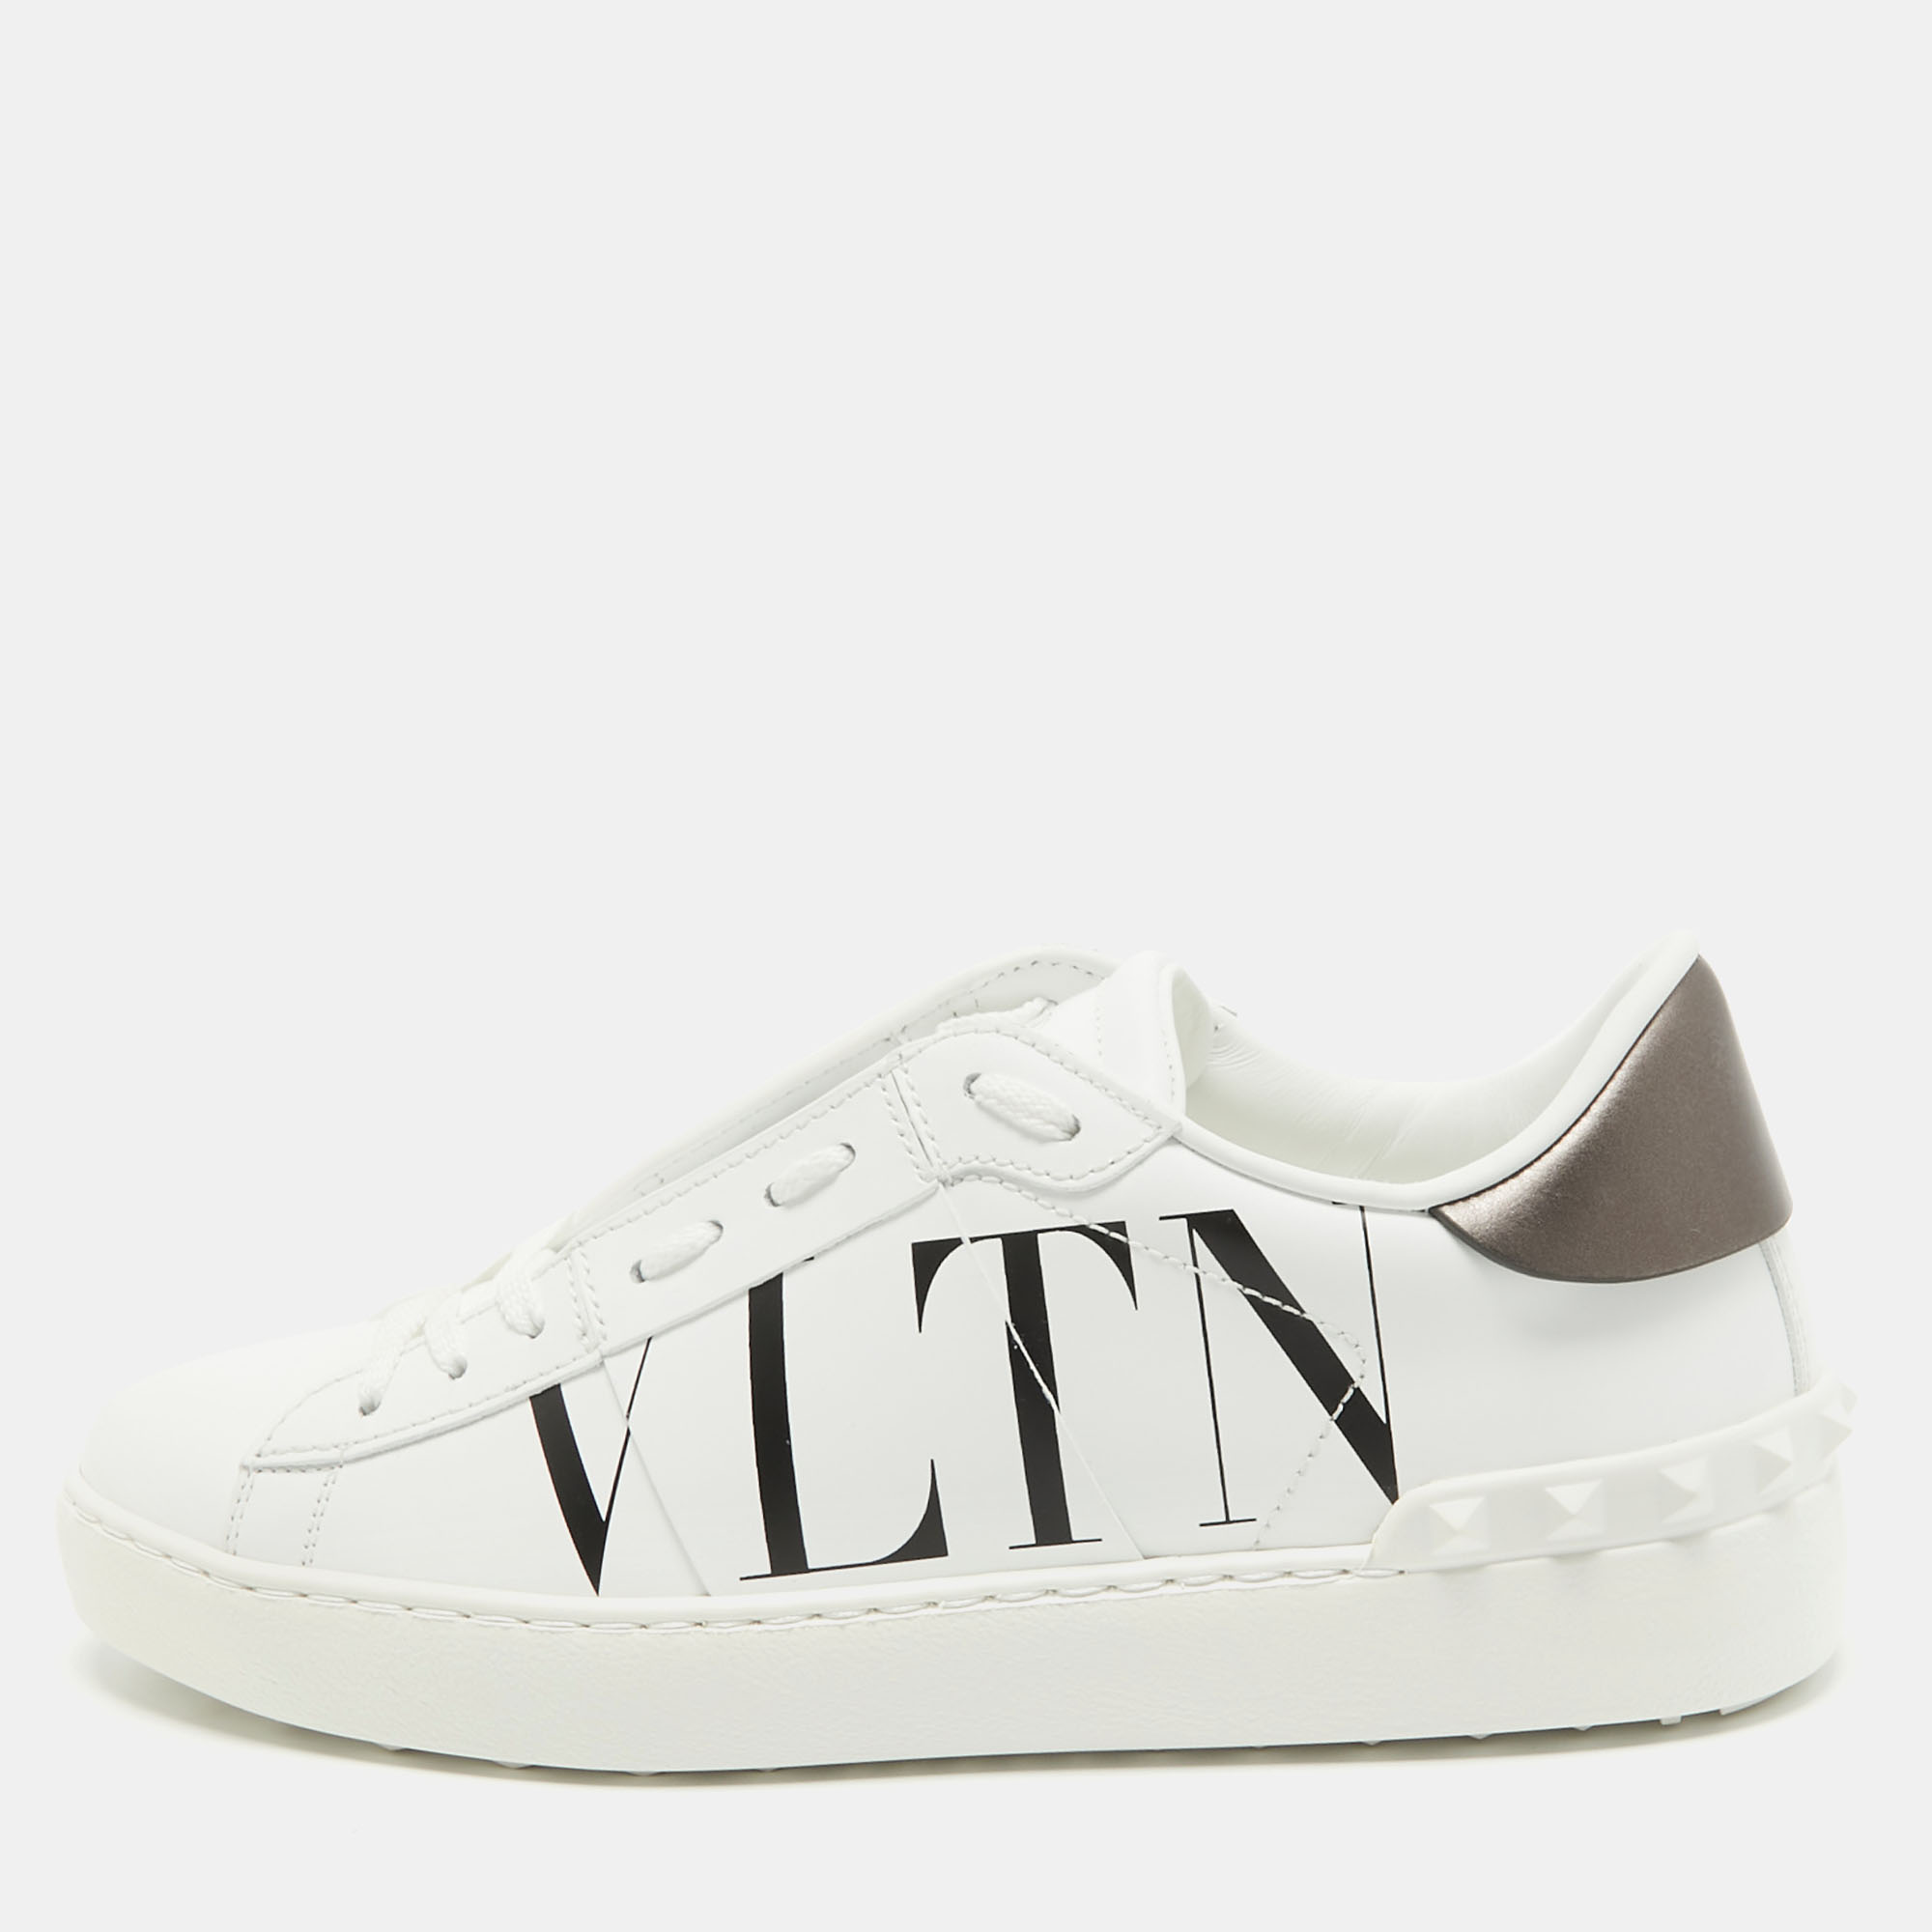 Give your outfit a luxe update with this pair of Valentino VLTN sneakers. The shoes are sewn perfectly to help you make a statement in them for a long time.